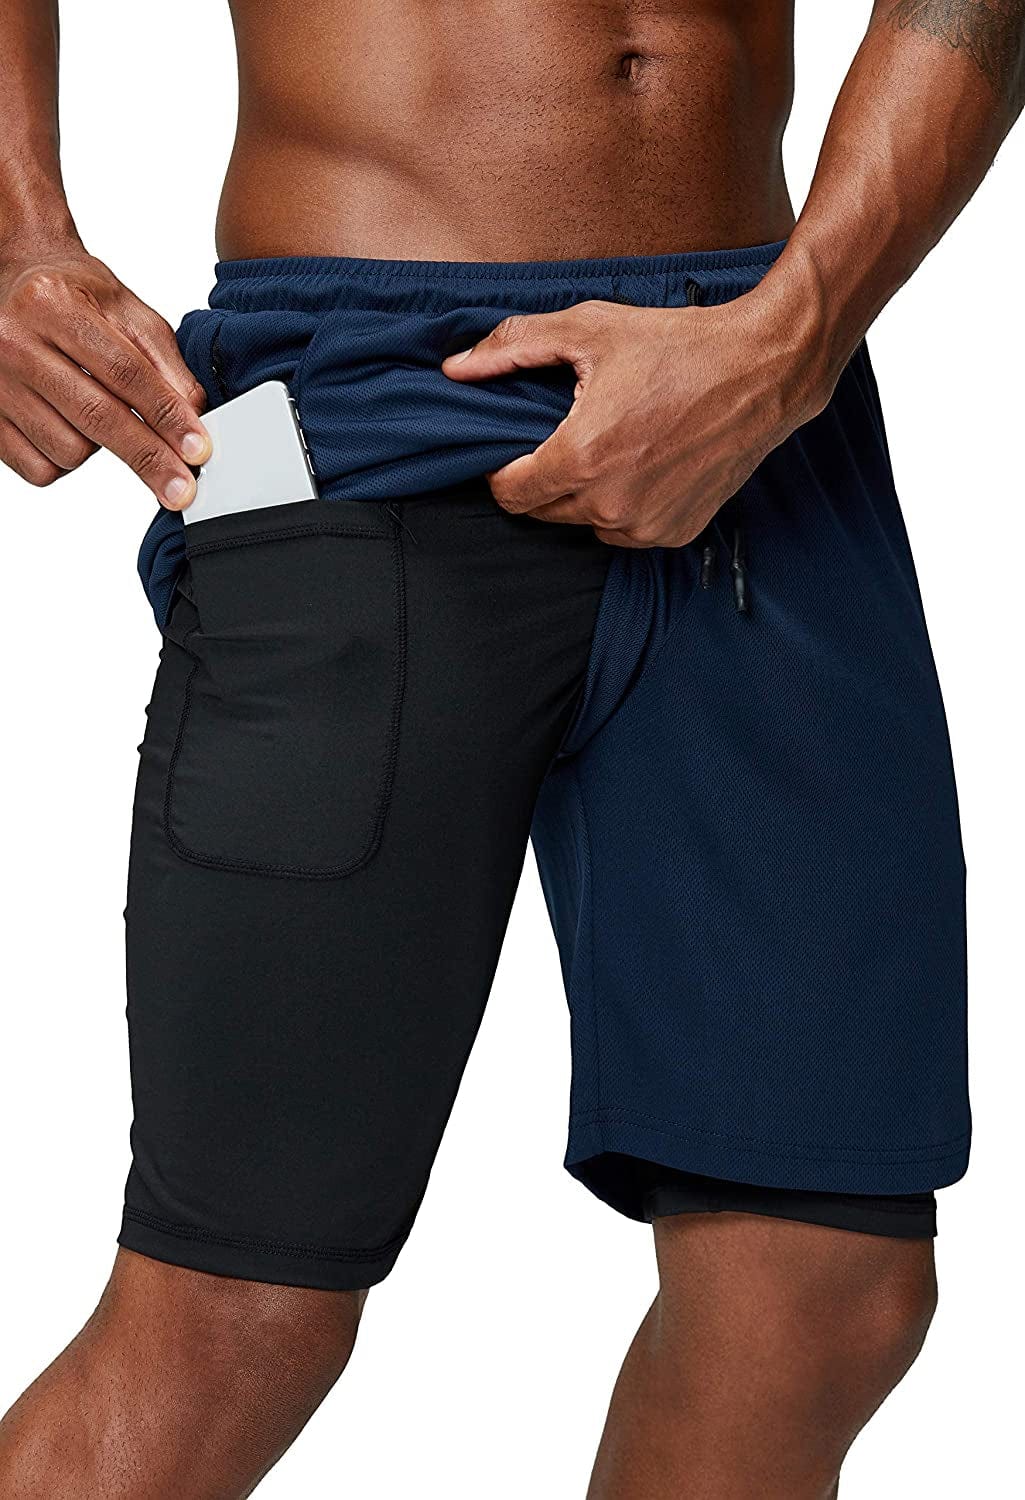 Pinkbomb Men'S 2 in 1 Running Shorts Gym Workout Quick Dry Mens Shorts with Phone Pocket Animals & Pet Supplies > Pet Supplies > Dog Supplies > Dog Apparel Pinkbomb Navy Blue 3X-Large 